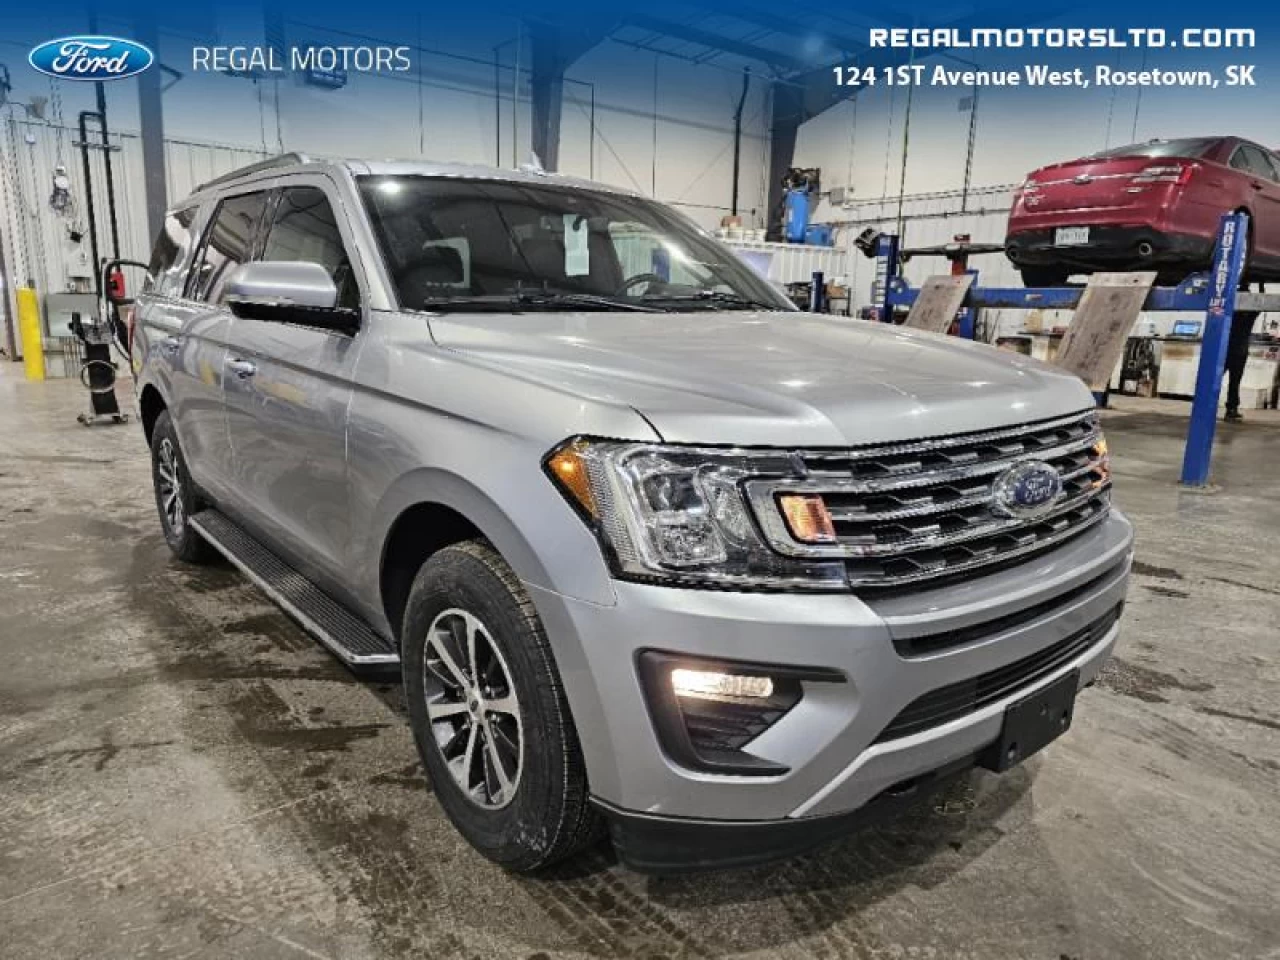 2021 Ford Expedition XLT Main Image